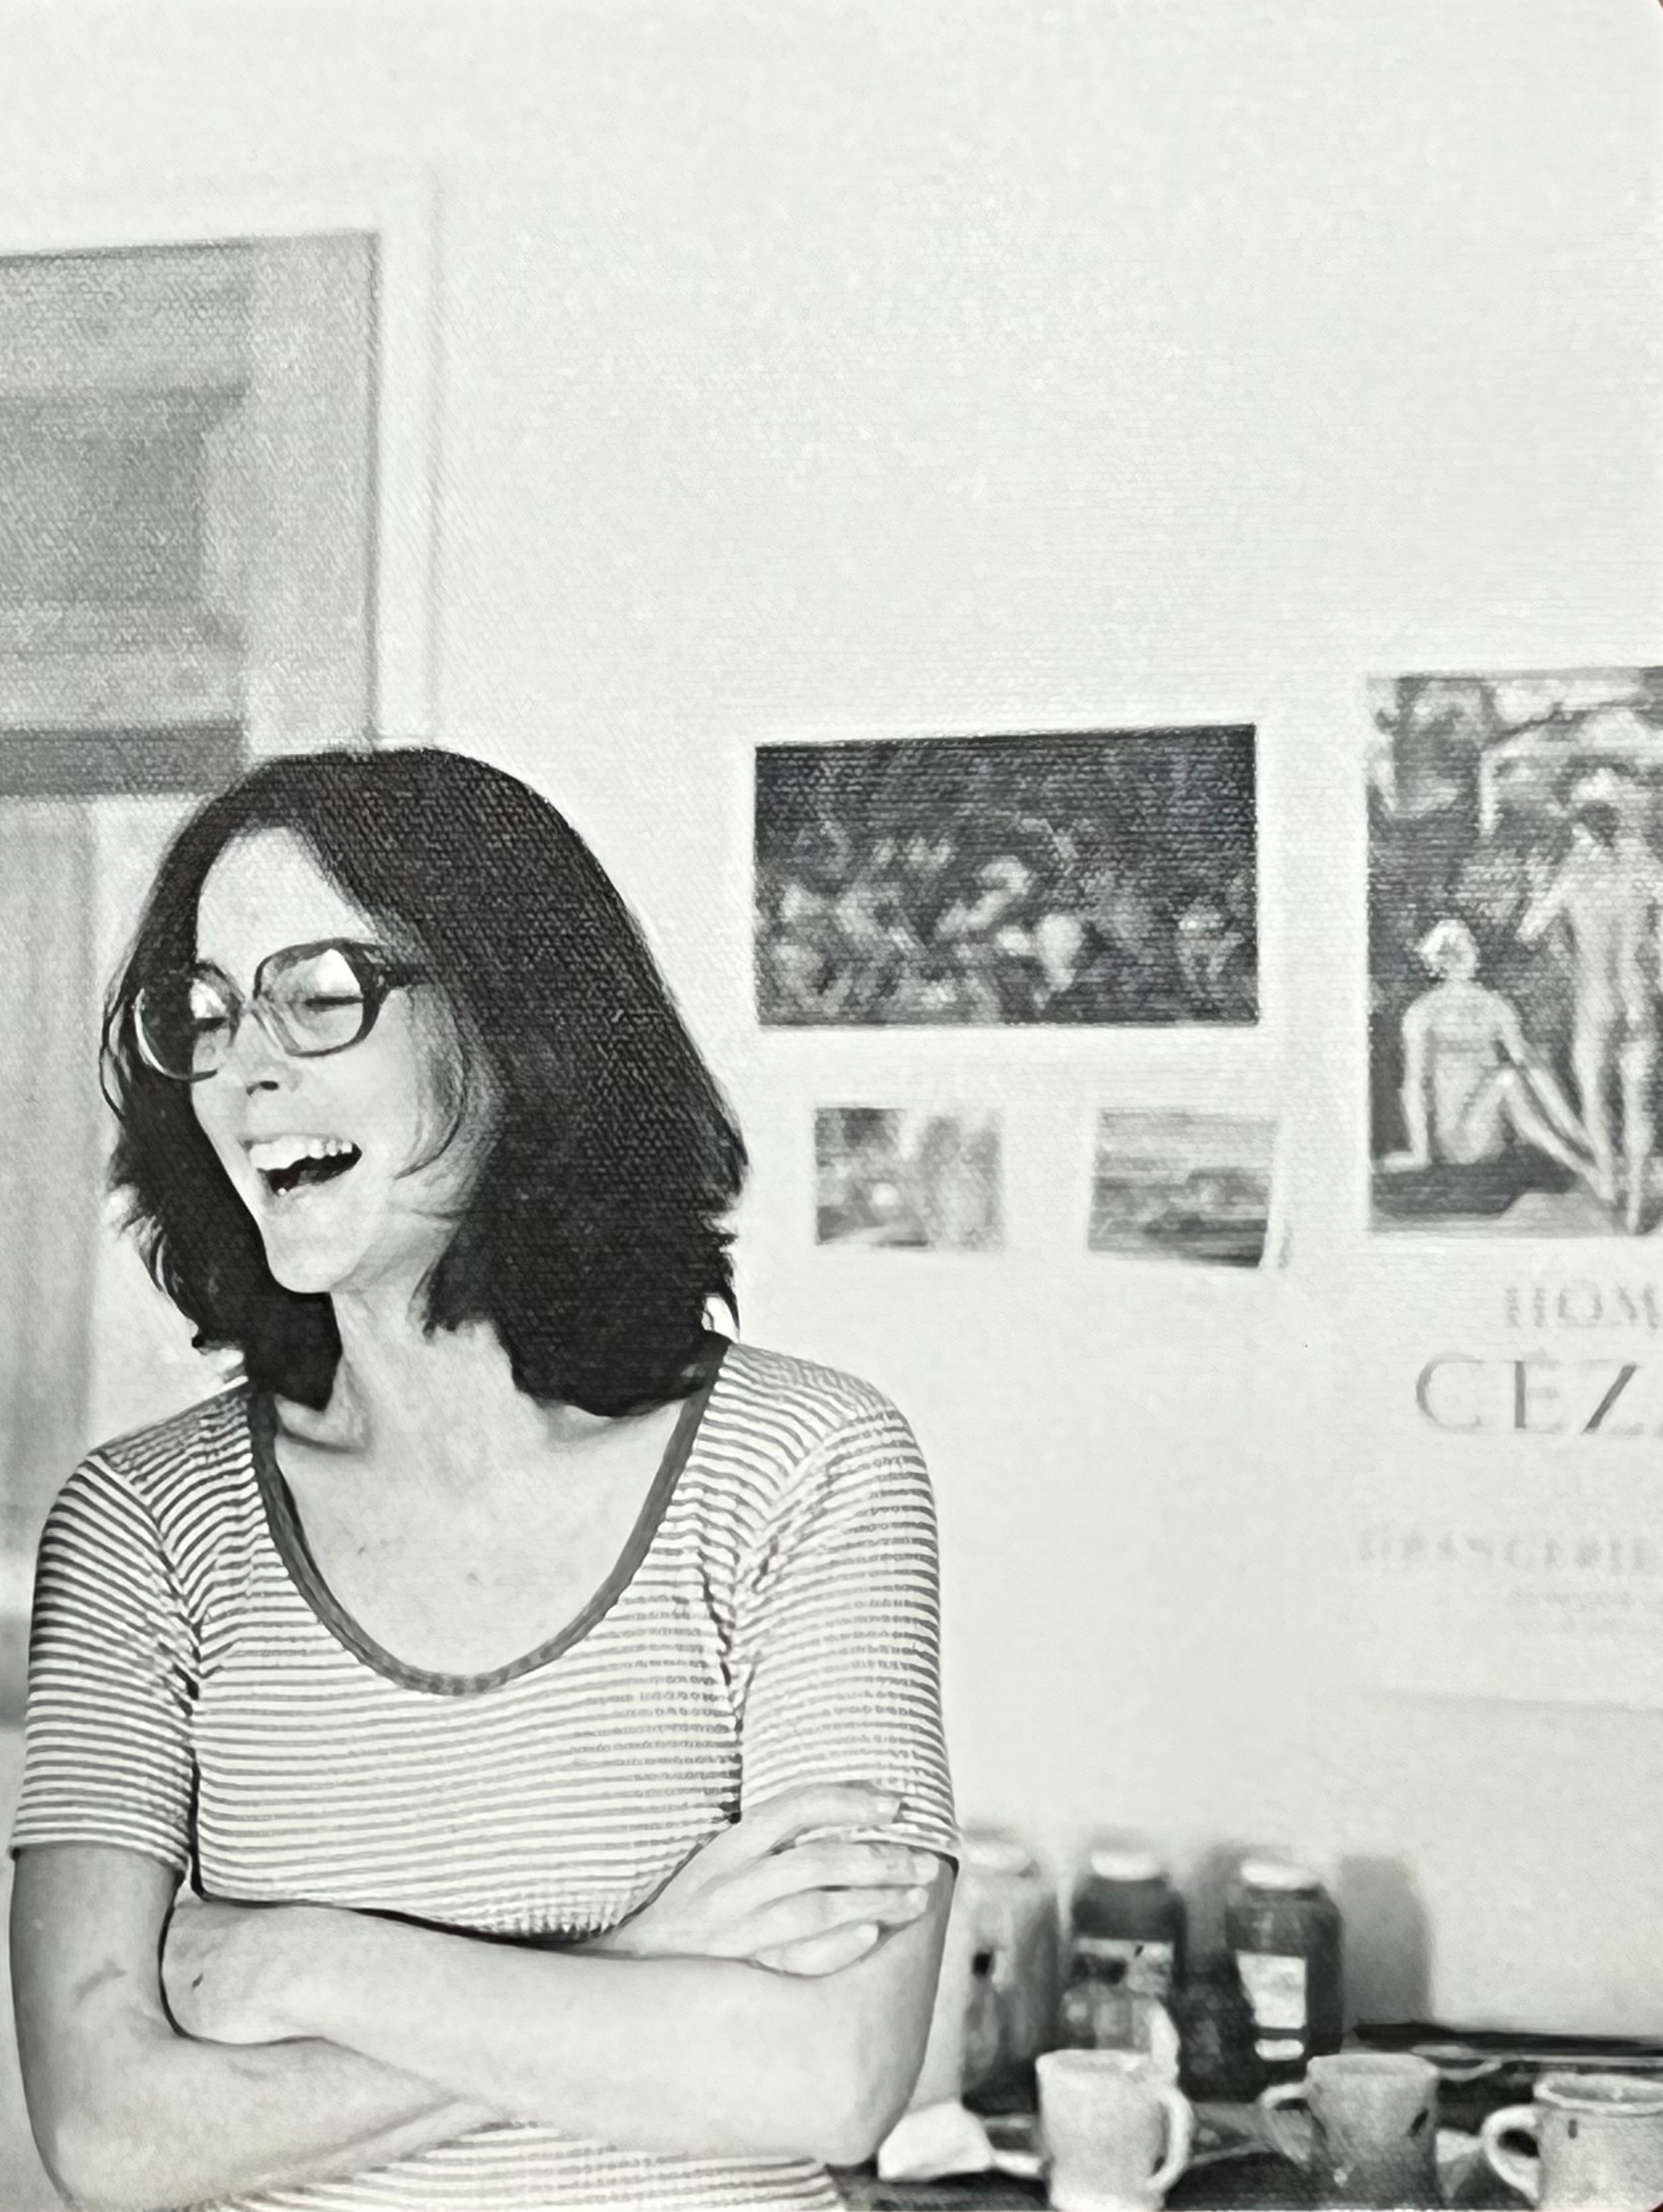 Black-and-white photo of a woman laughing in a room with art prints on the wall behind her.